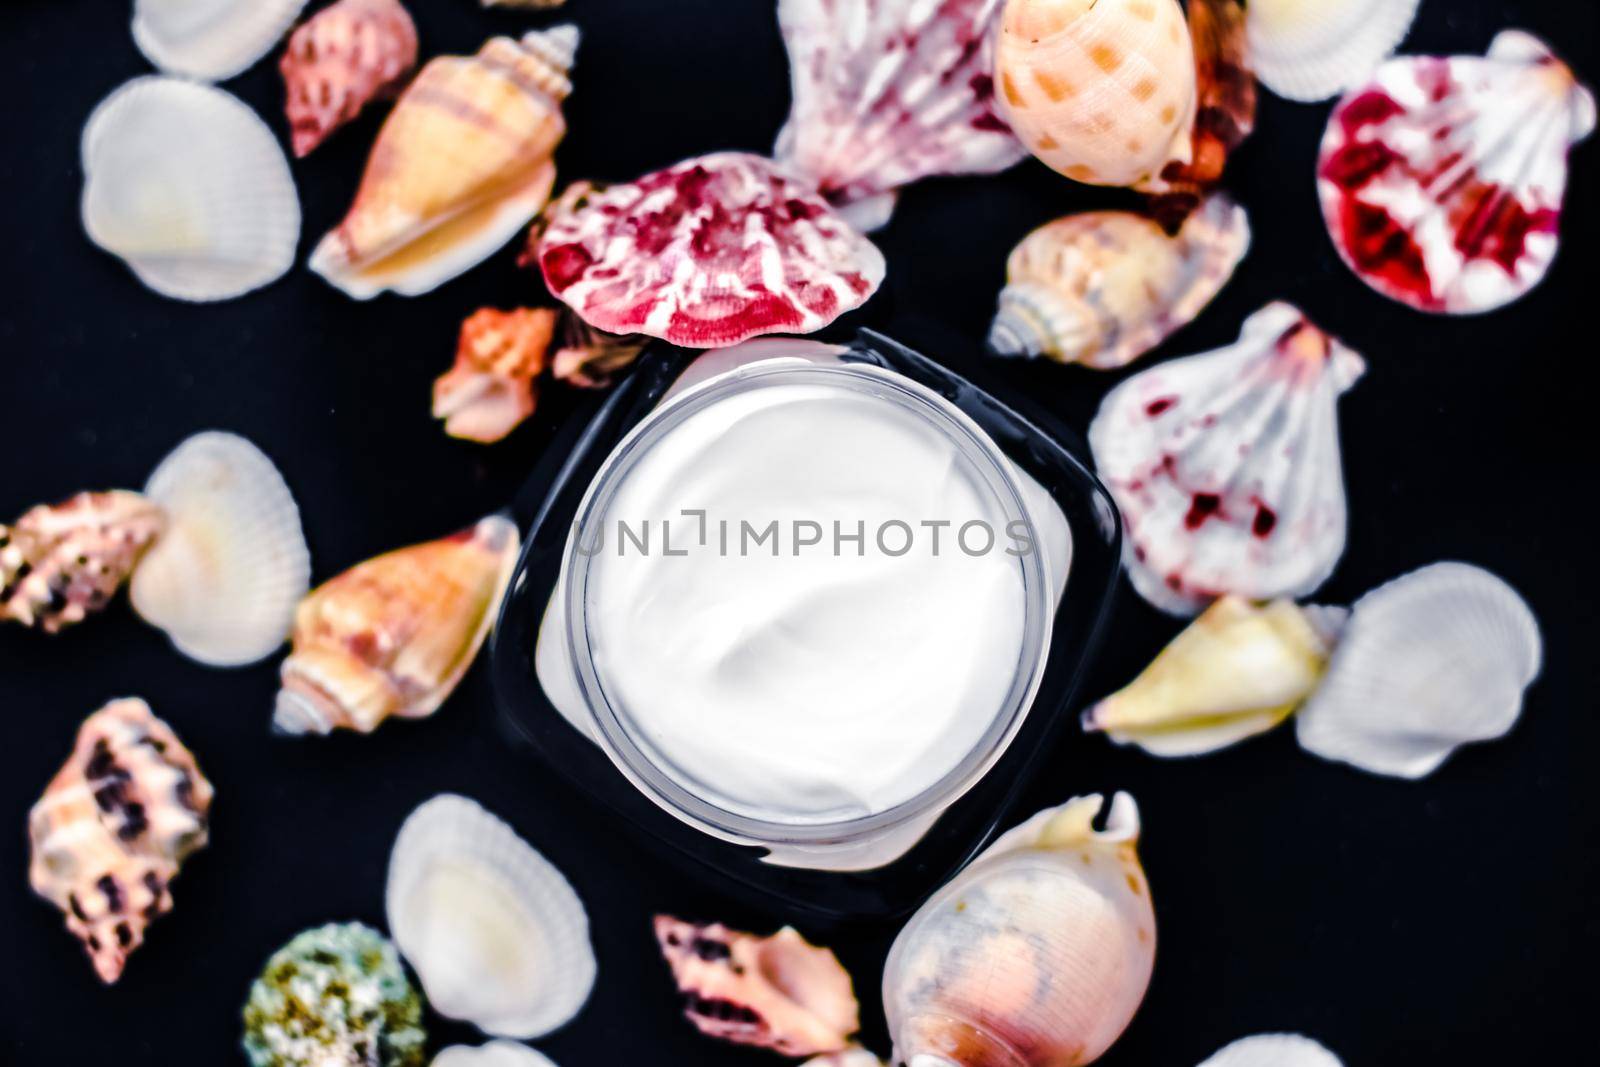 Sensitive skincare moisturizer beauty face cream on water and sea shells background, luxury anti-age cosmetics by Anneleven